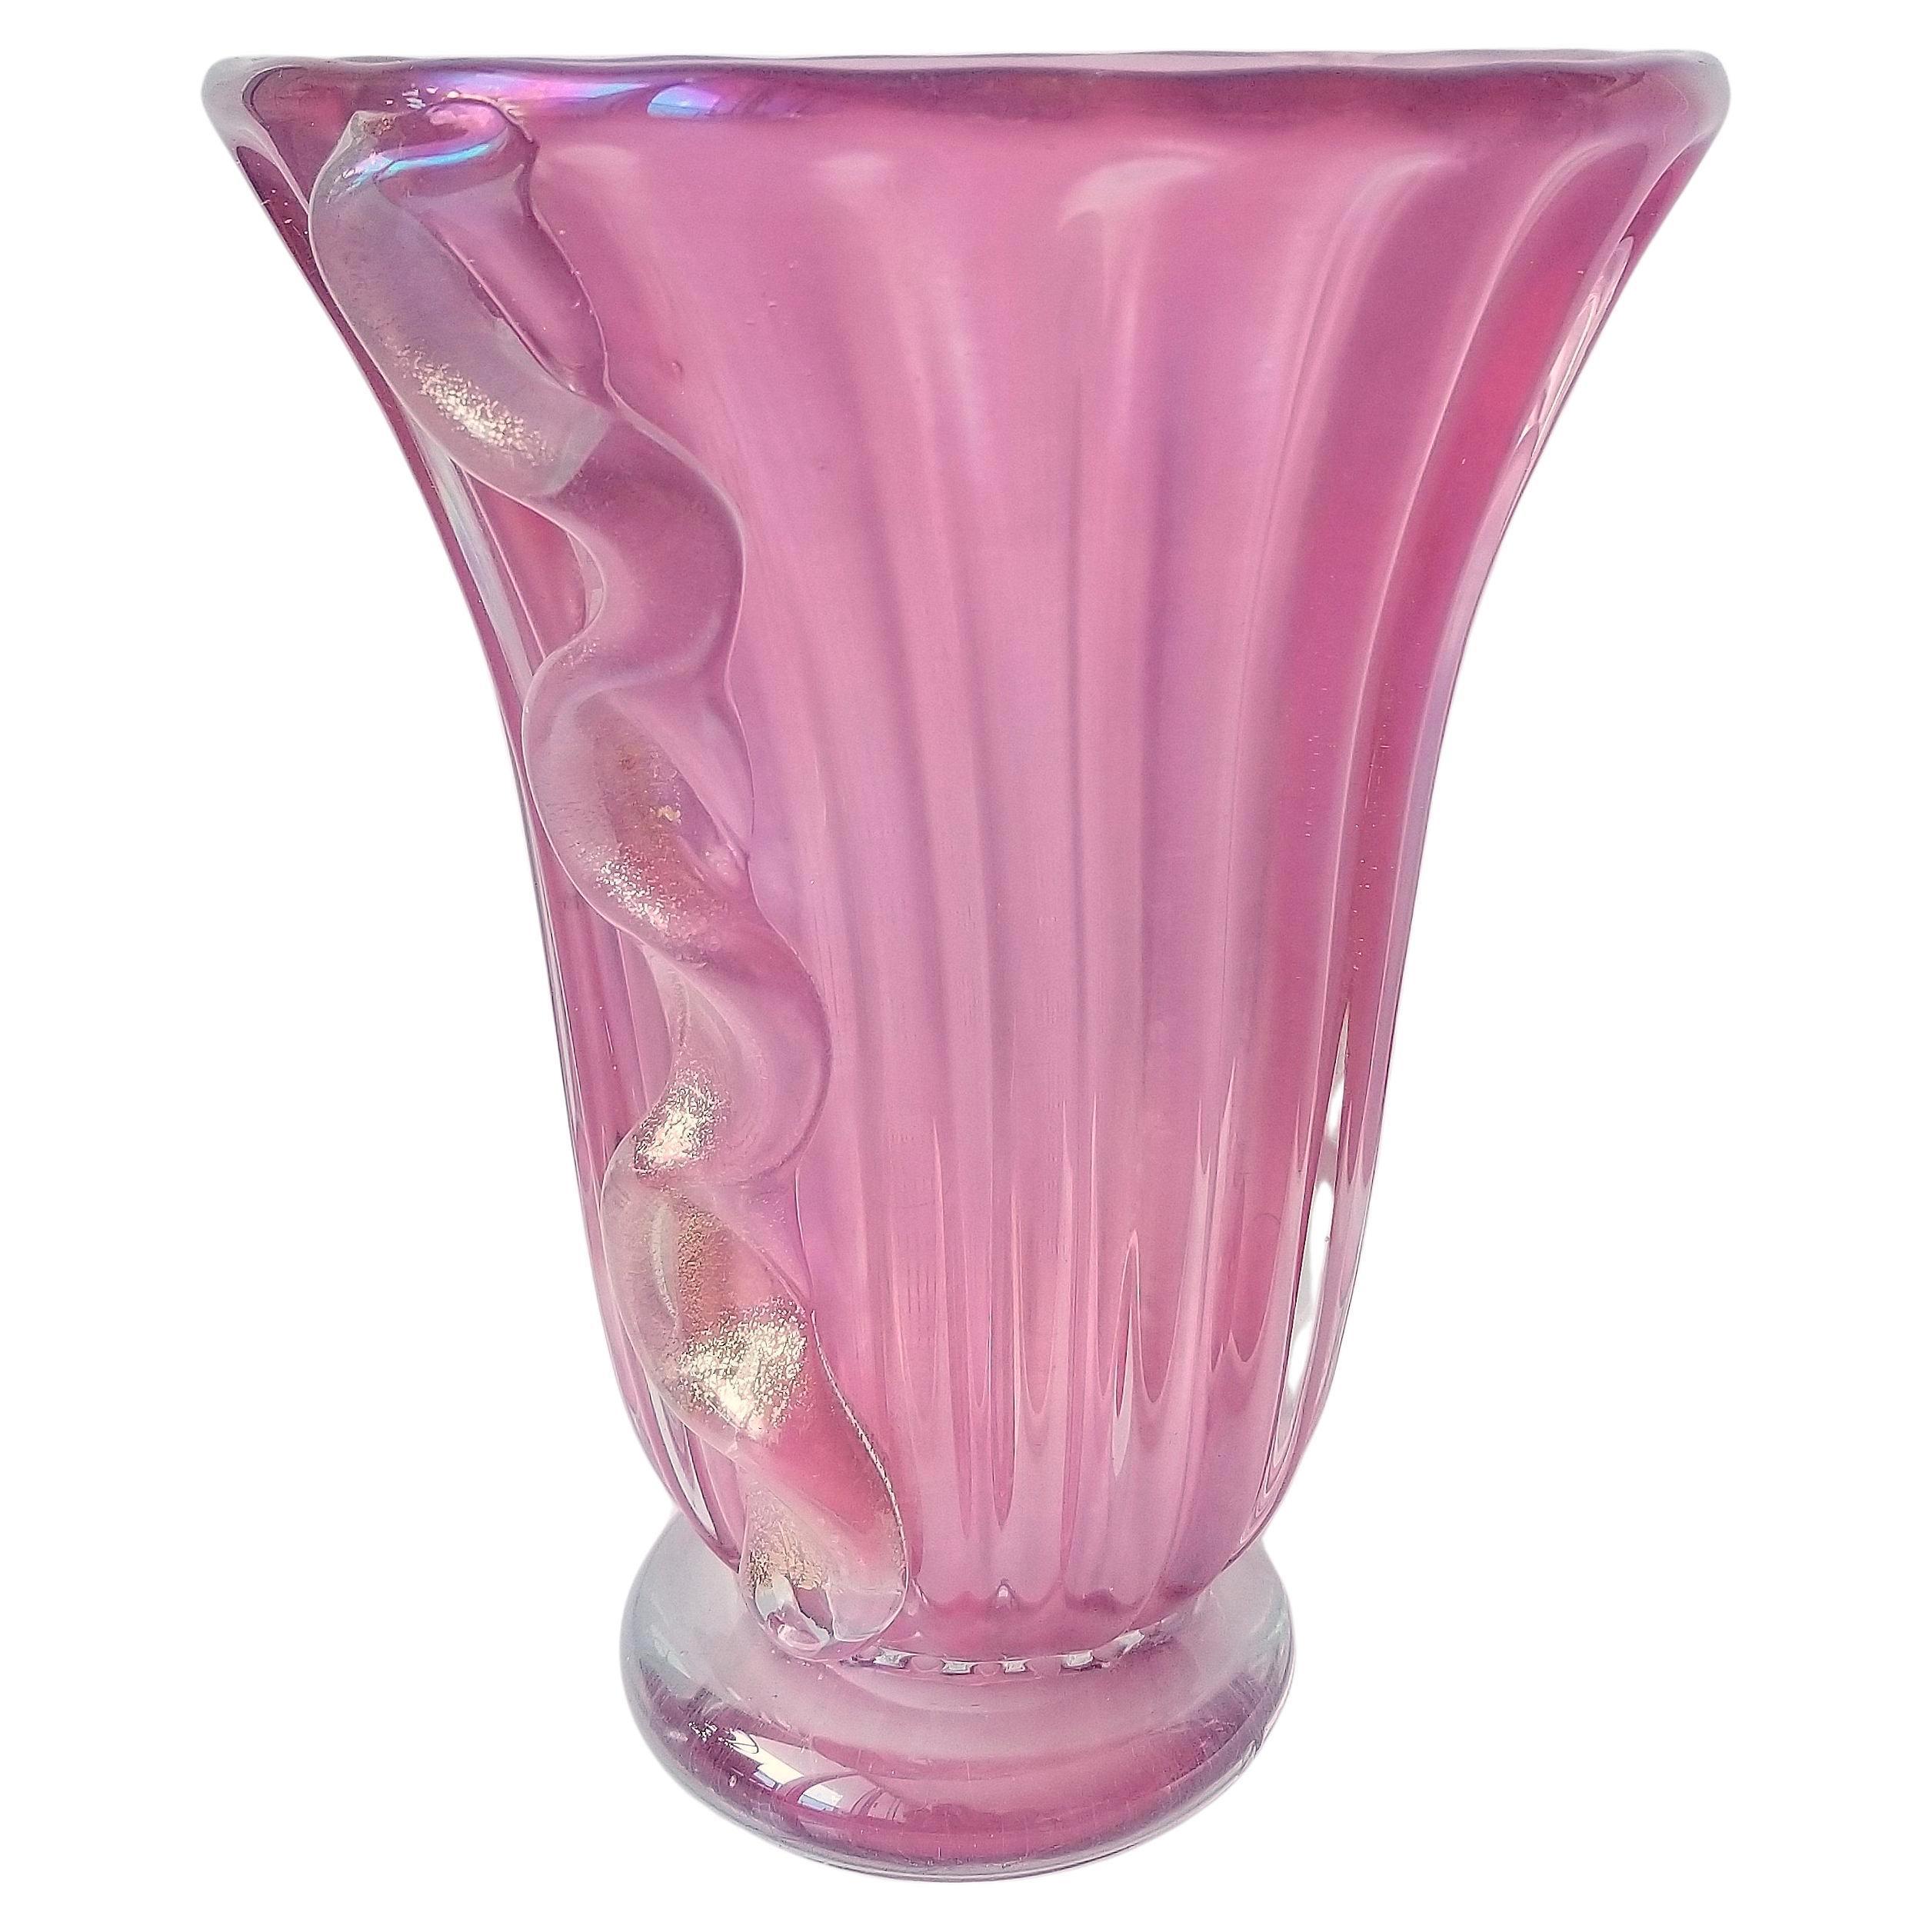 Barovier & Toso Murano Large Fluted Art Glass Vase In Excellent Condition For Sale In Miami, FL